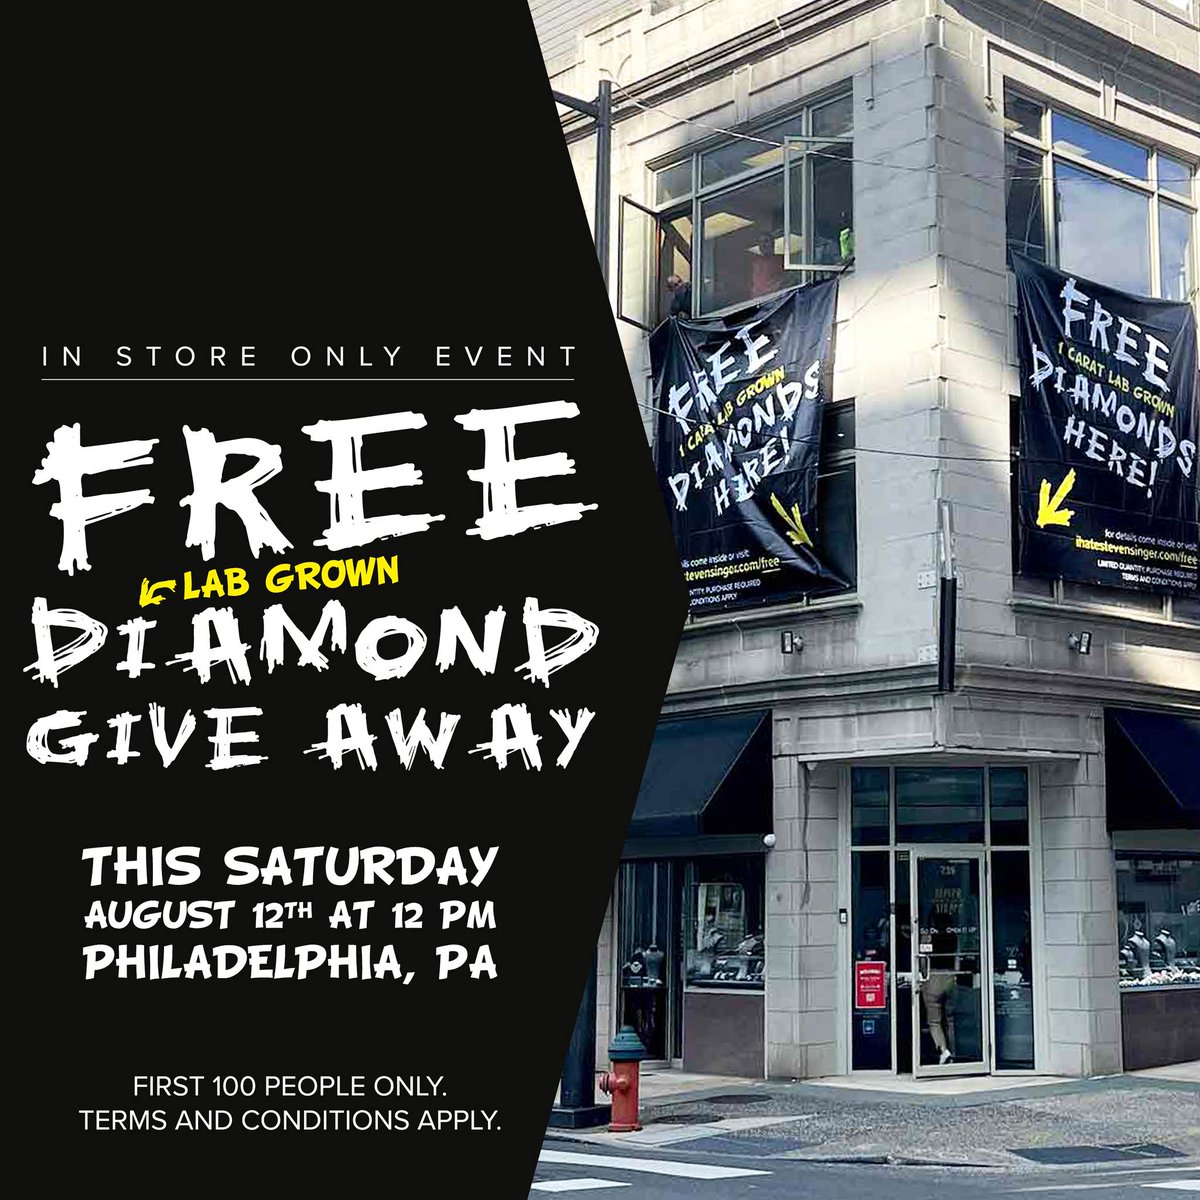 Guests are lining up RIGHT NOW! Steven Singer Jewelers is giving the first 100 guests TODAY a FREE 1/2ct Lab Grown Diamond! Starting at 12pm! No purchase required! Terms and Conditions Apply! ihatestevensinger.com/pages/free-dia…